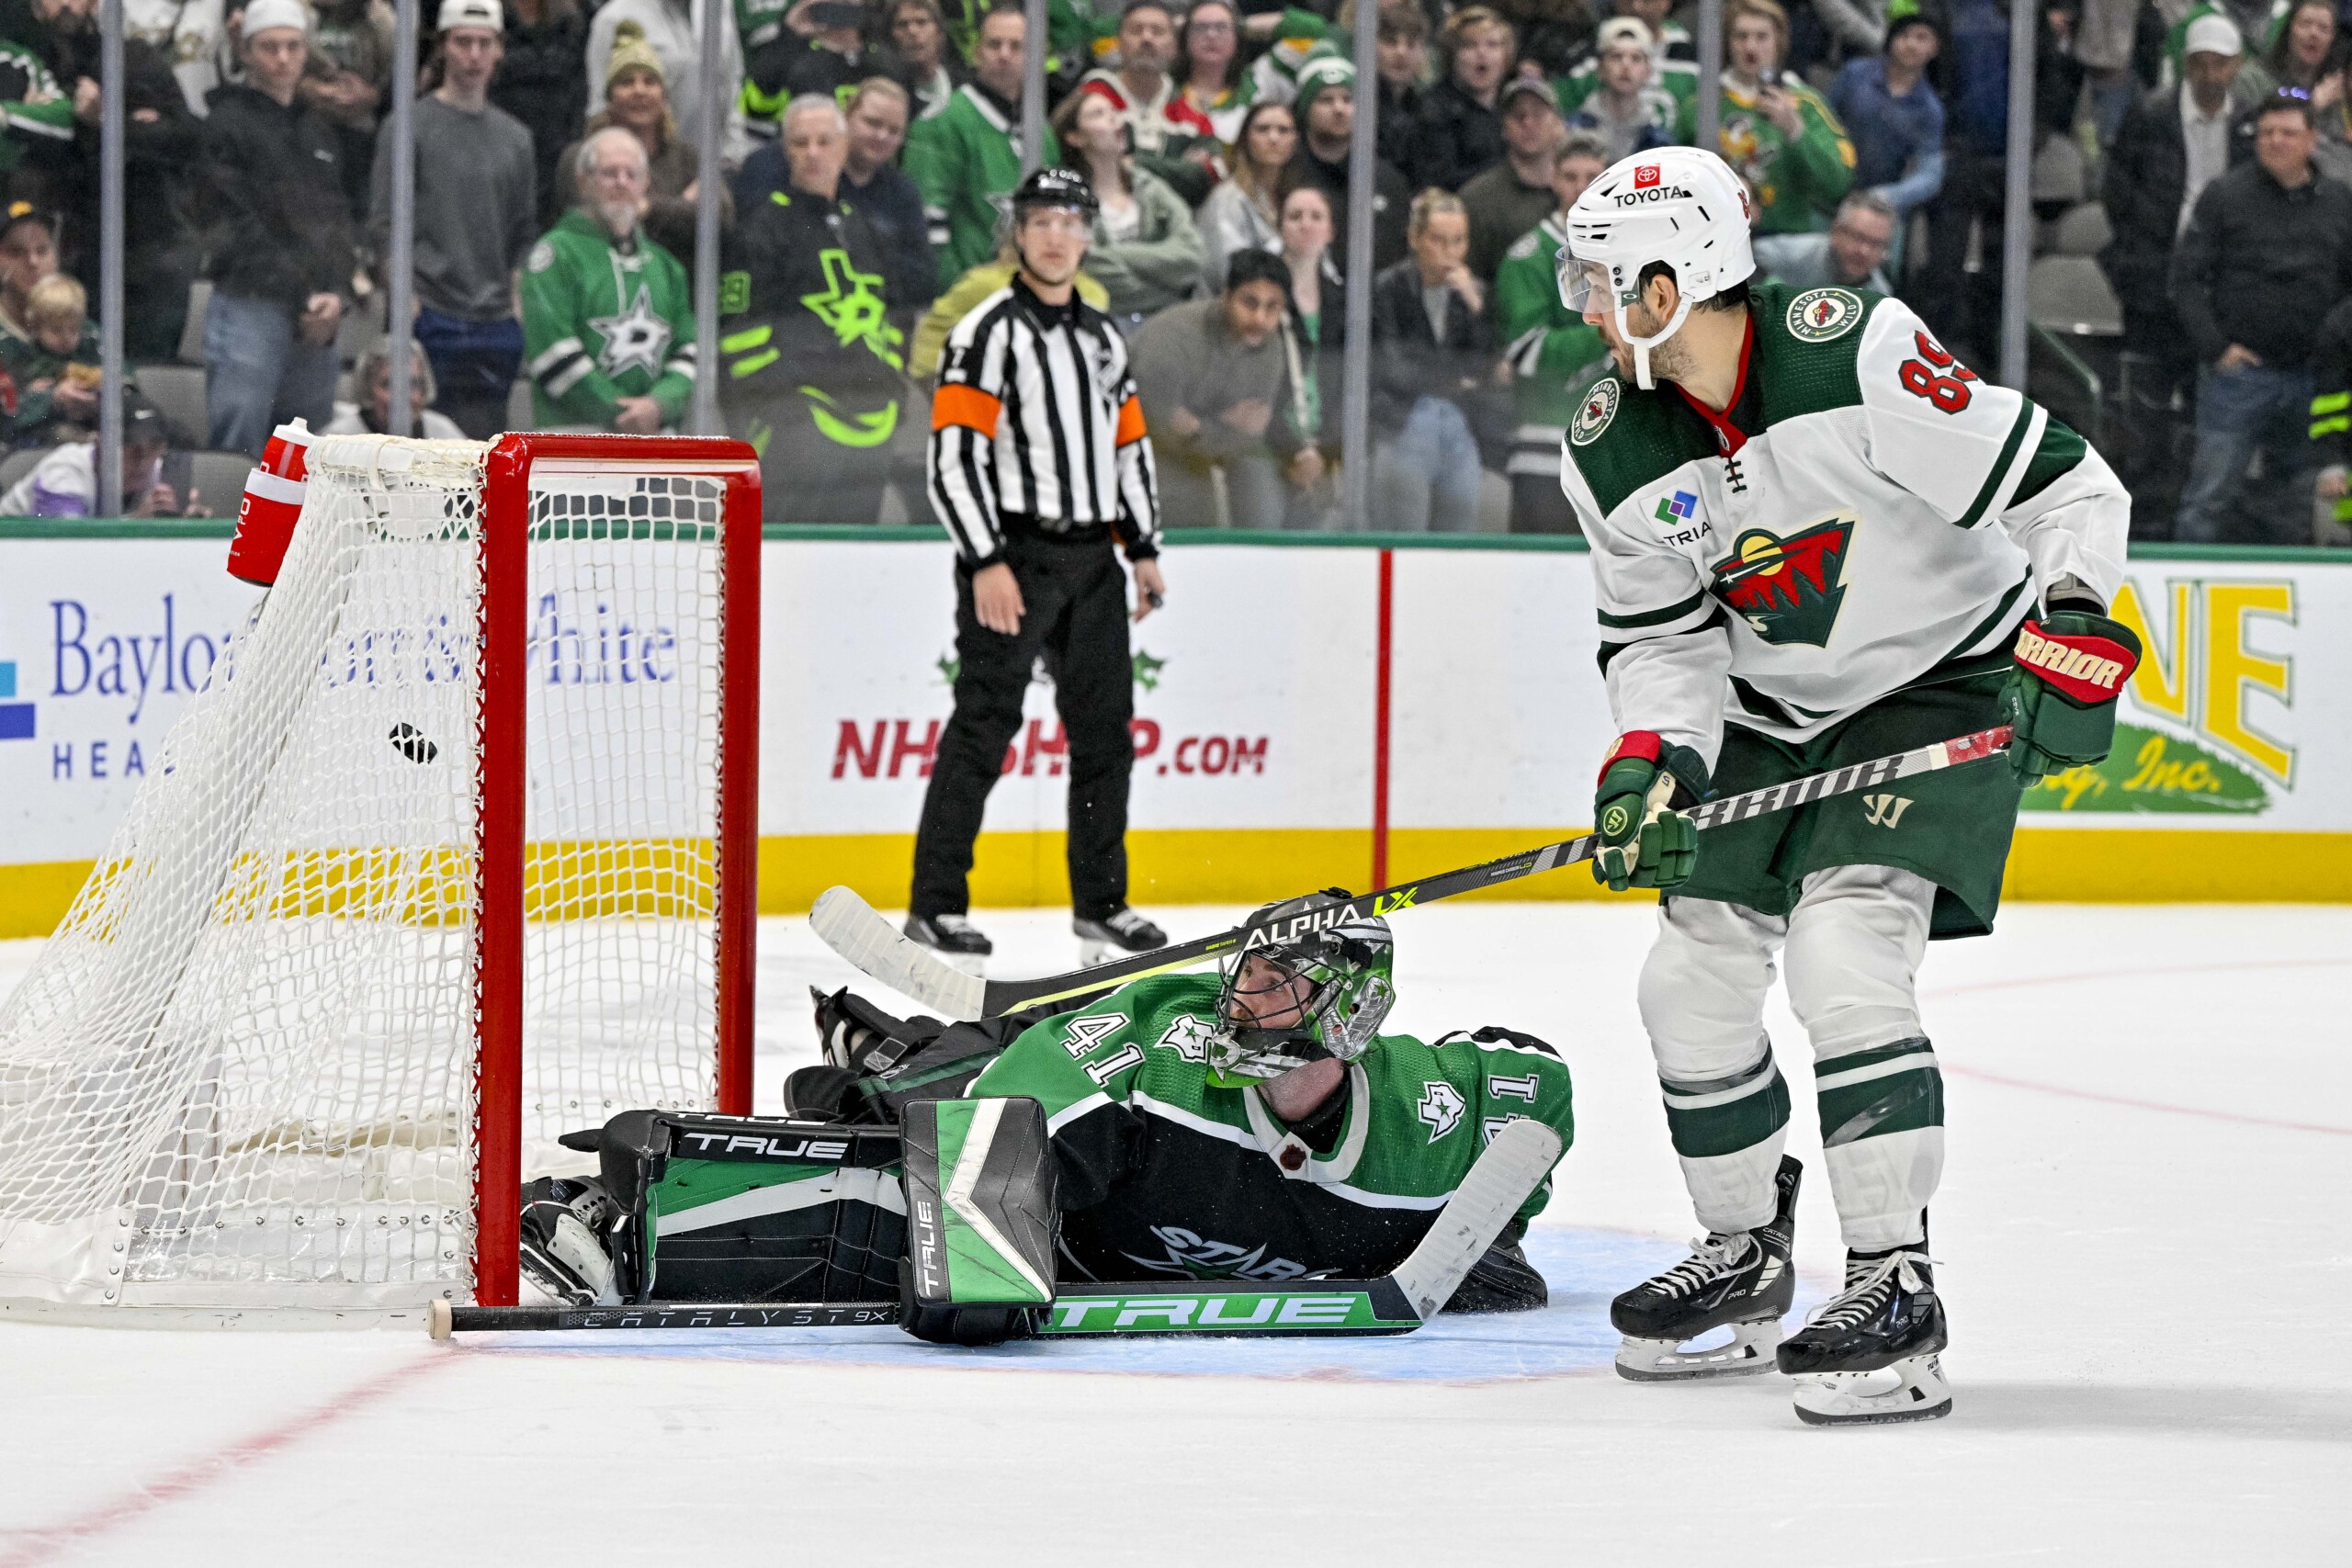 Back on home ice: See photos from the Dallas Stars' overtime win